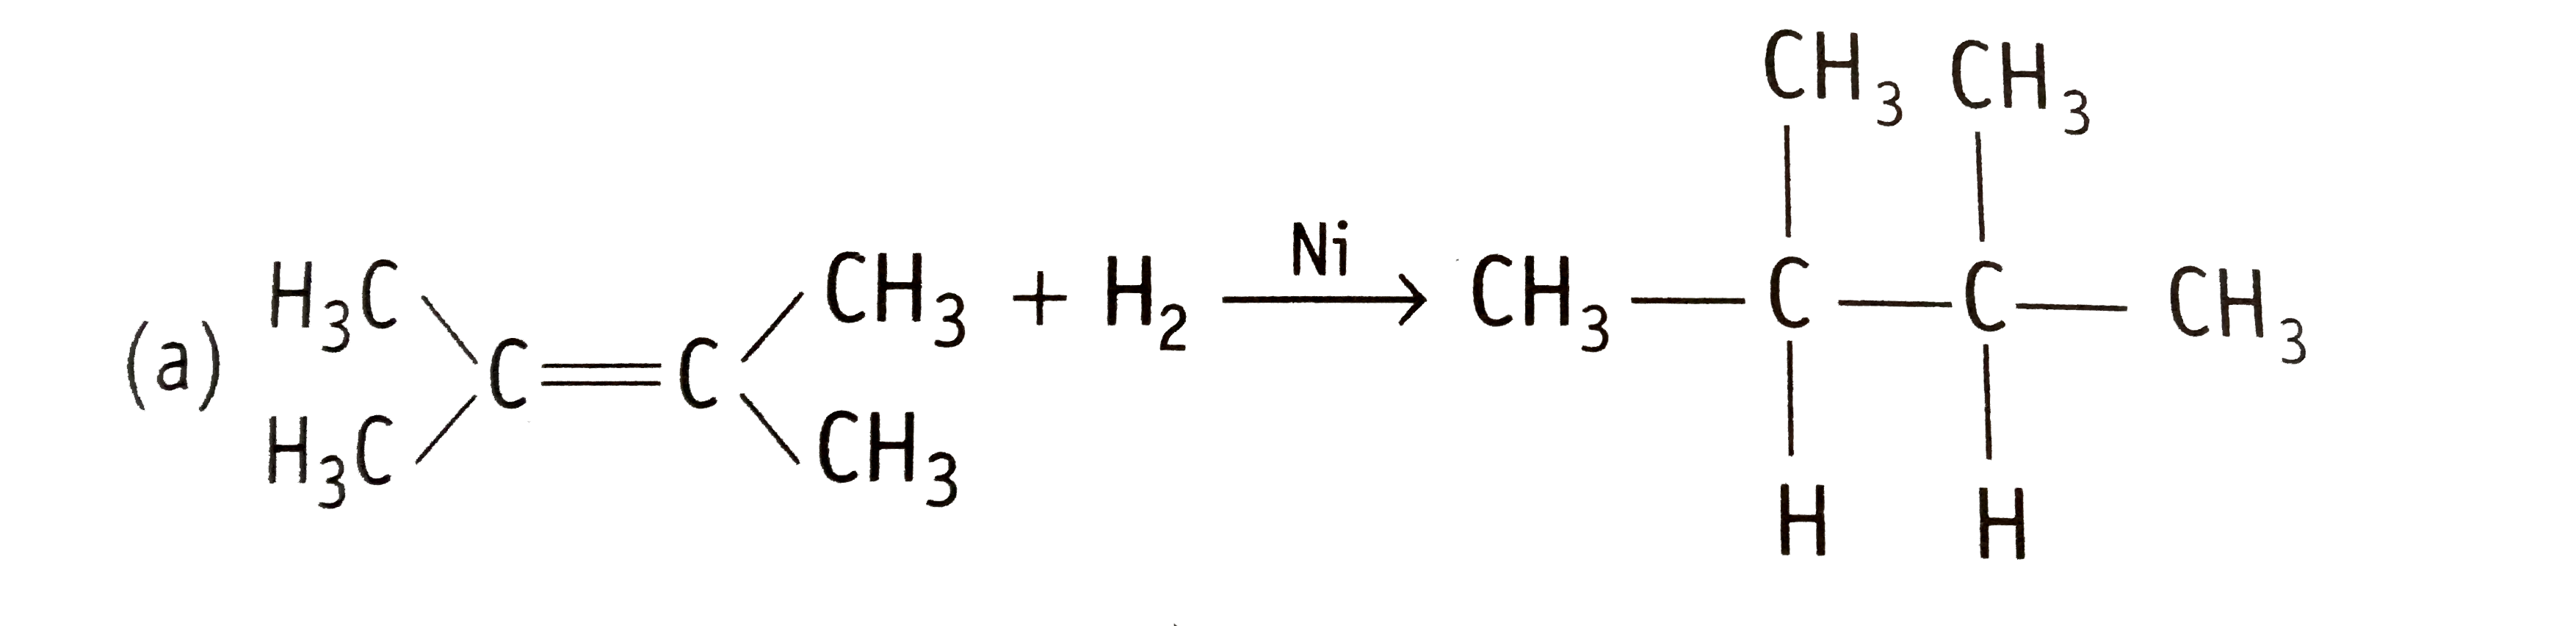 What is the role of metal or reagents written on arrows in the given chemical reactions ?    (a)      (b) CH(3)COOH+CH(3)CH(2)OHoverset(